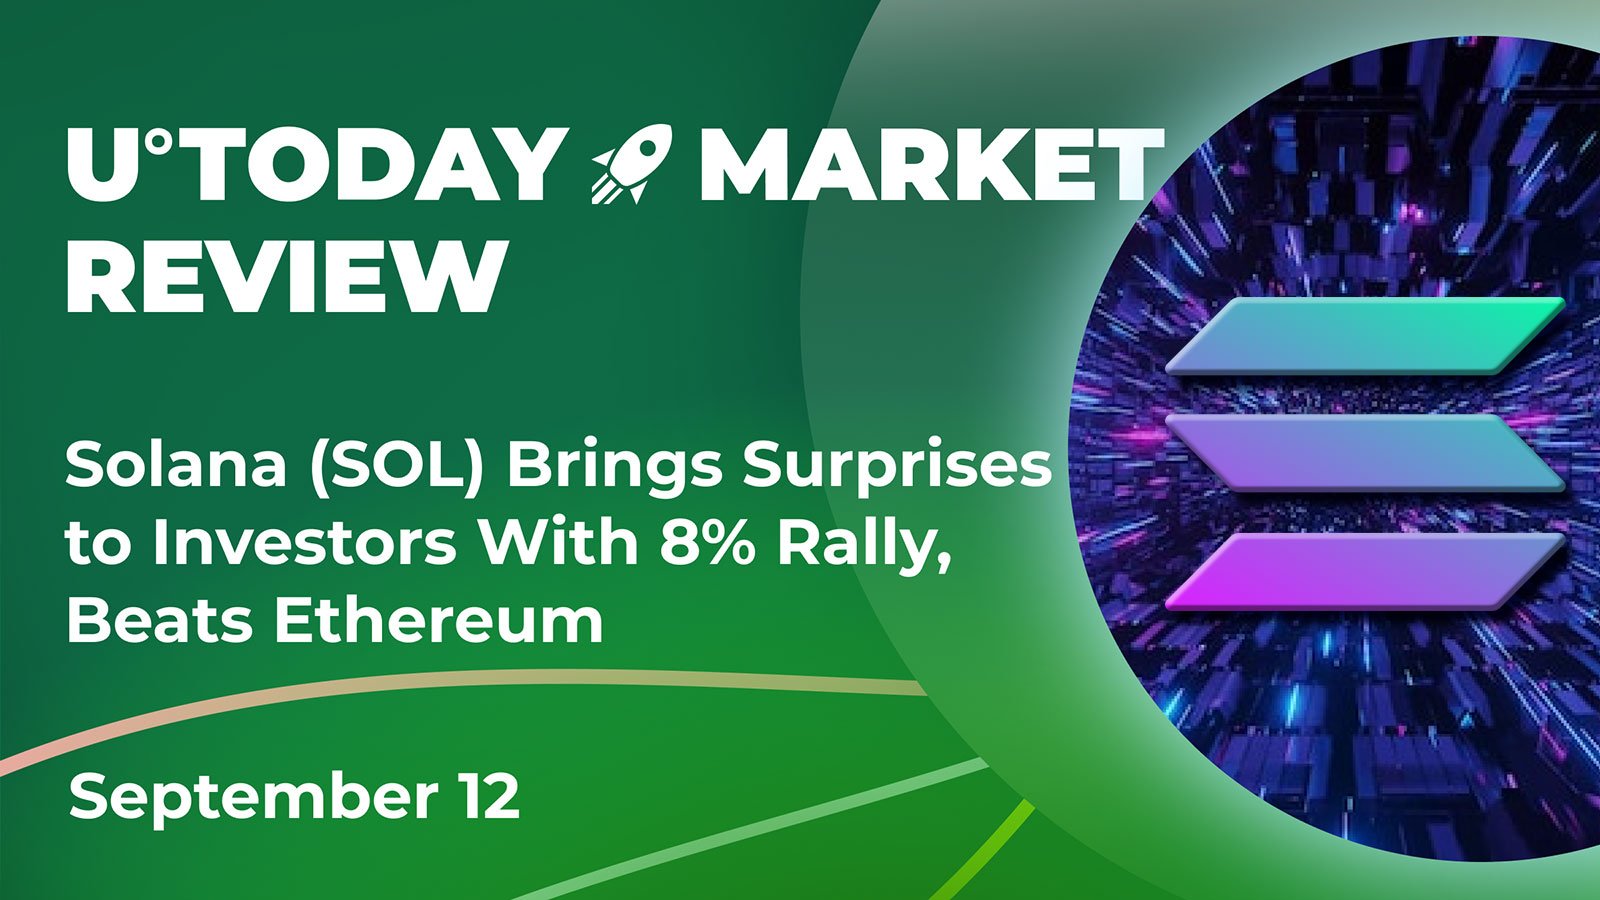 Solana (SOL) Brings Surprises to Investors With 8% Rally, Beats Ethereum: Crypto Market Review, September 12